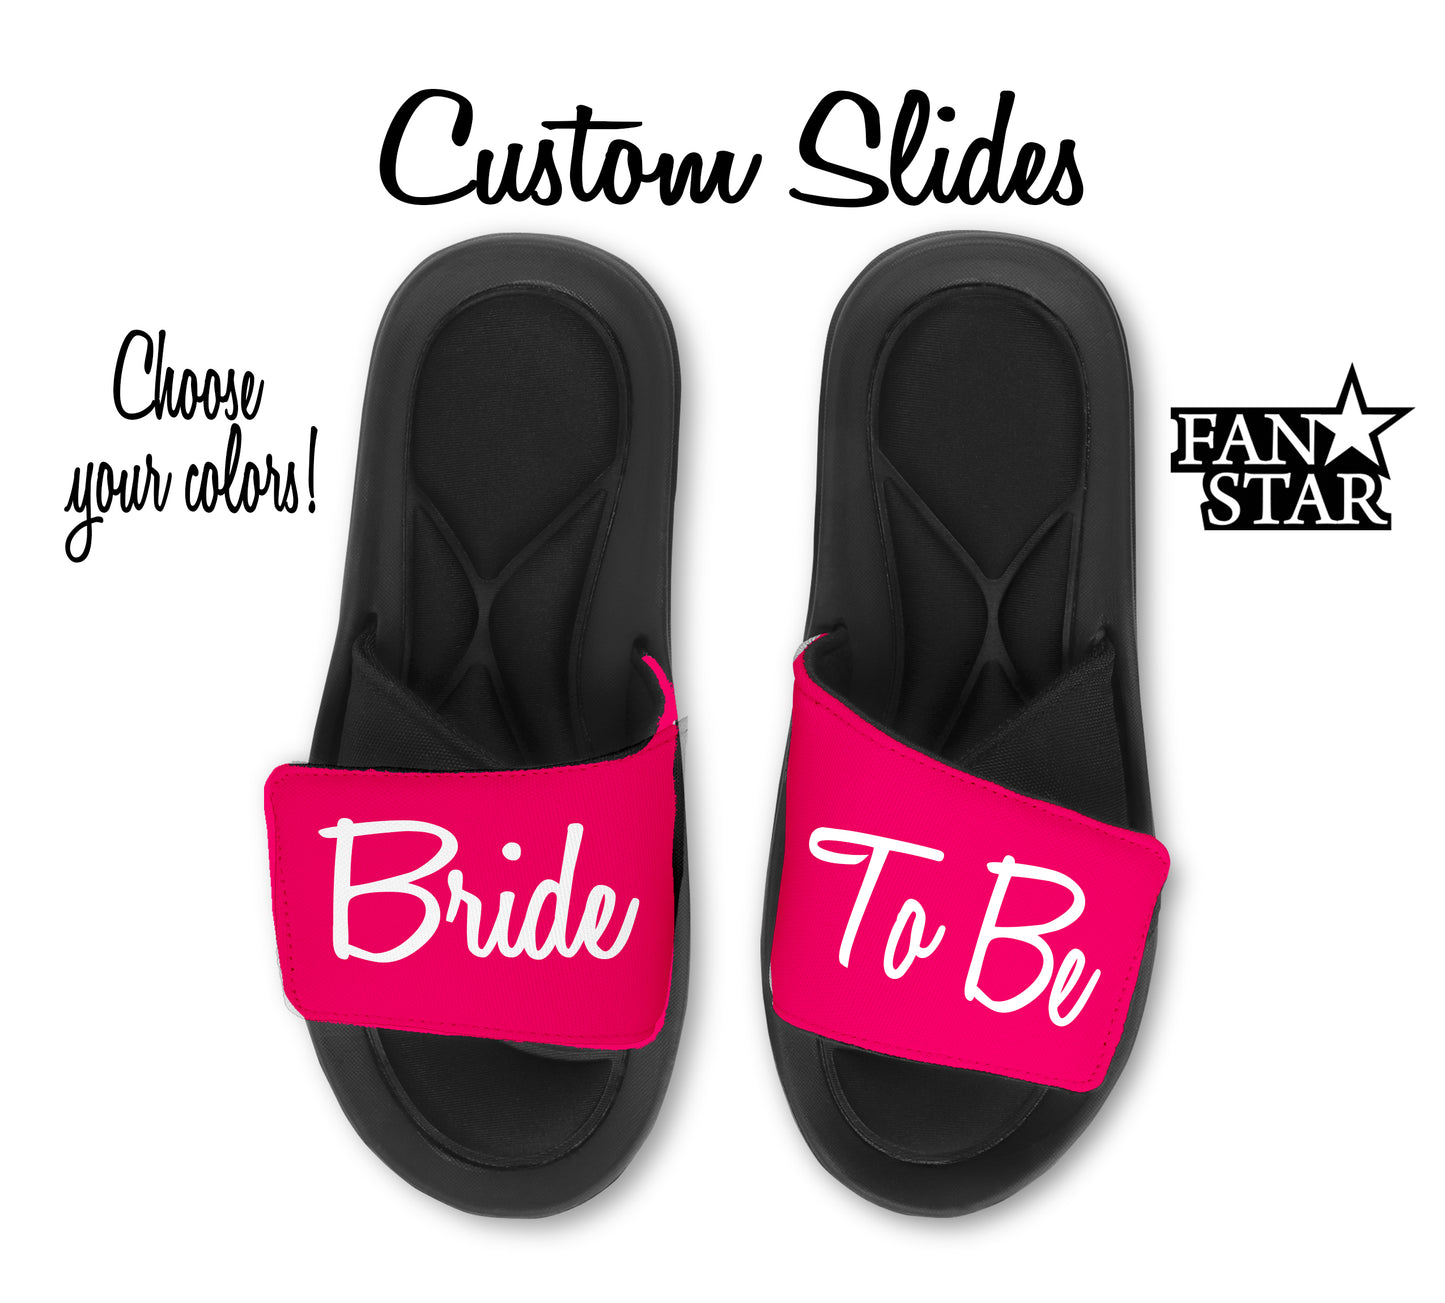 Bride to be Slides, Customize to Match Wedding Colors